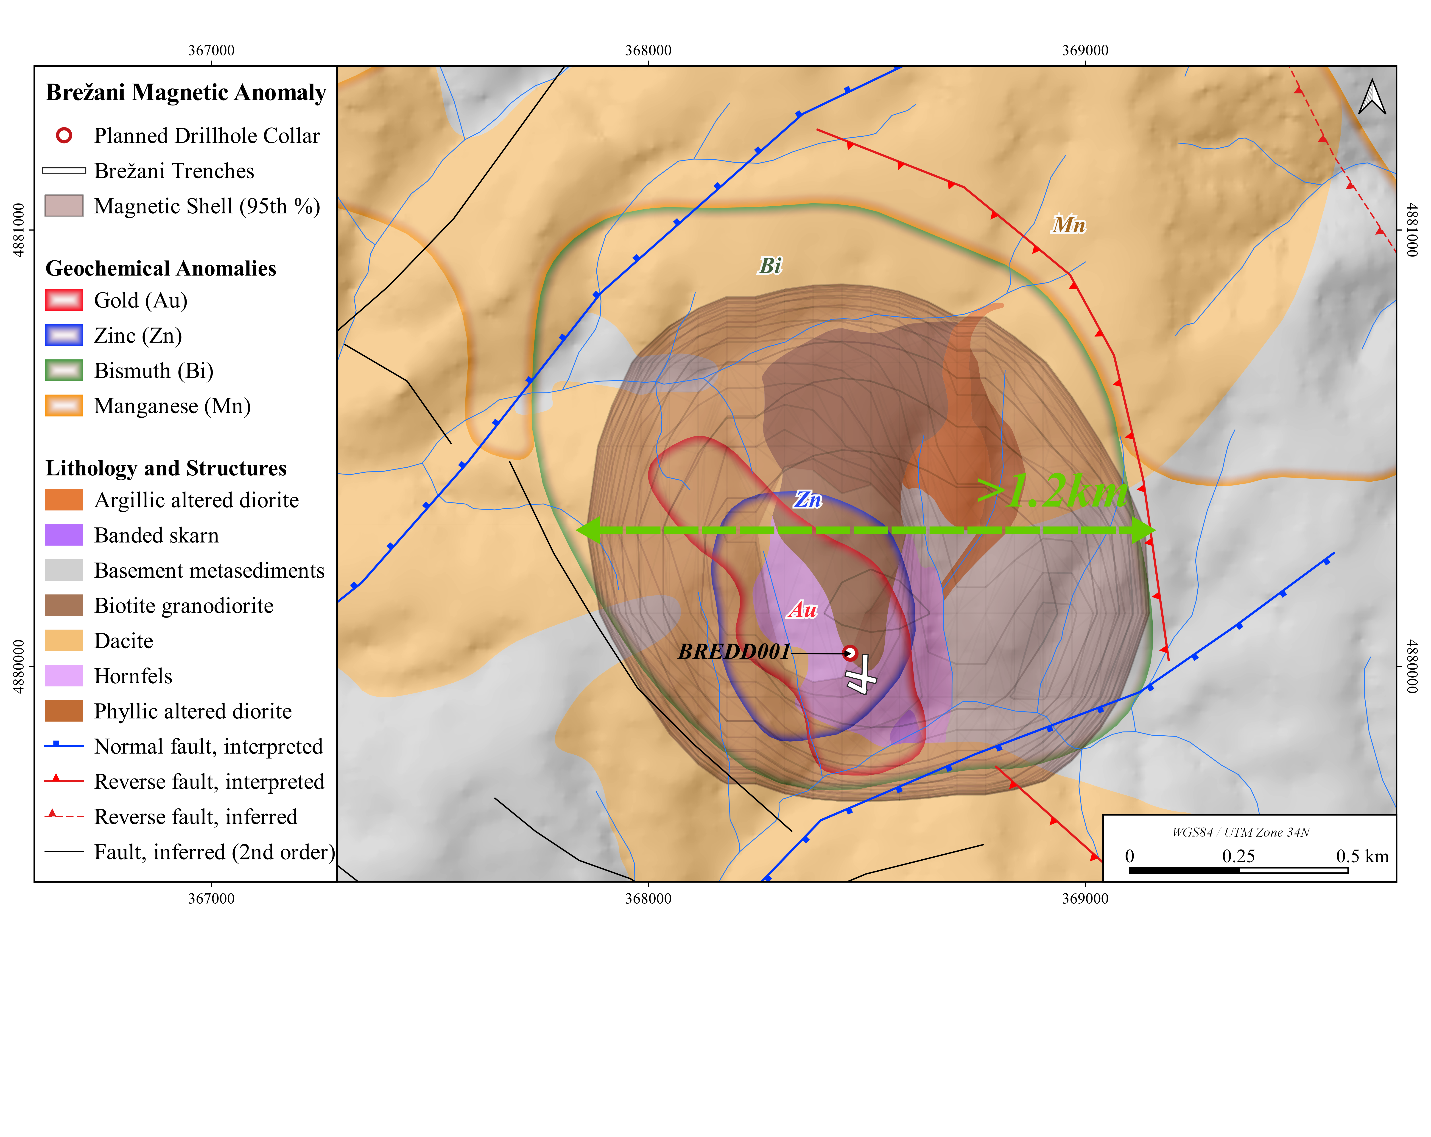 Figure 3: Geological map of Brezani outlines the trenching centred upon the geochemical and 1.2 km wide, subsurface magnetic anomaly. BRE_DD_001 is the collar location of the initial drillhole planned to test the Brezani target where drilling has commenced